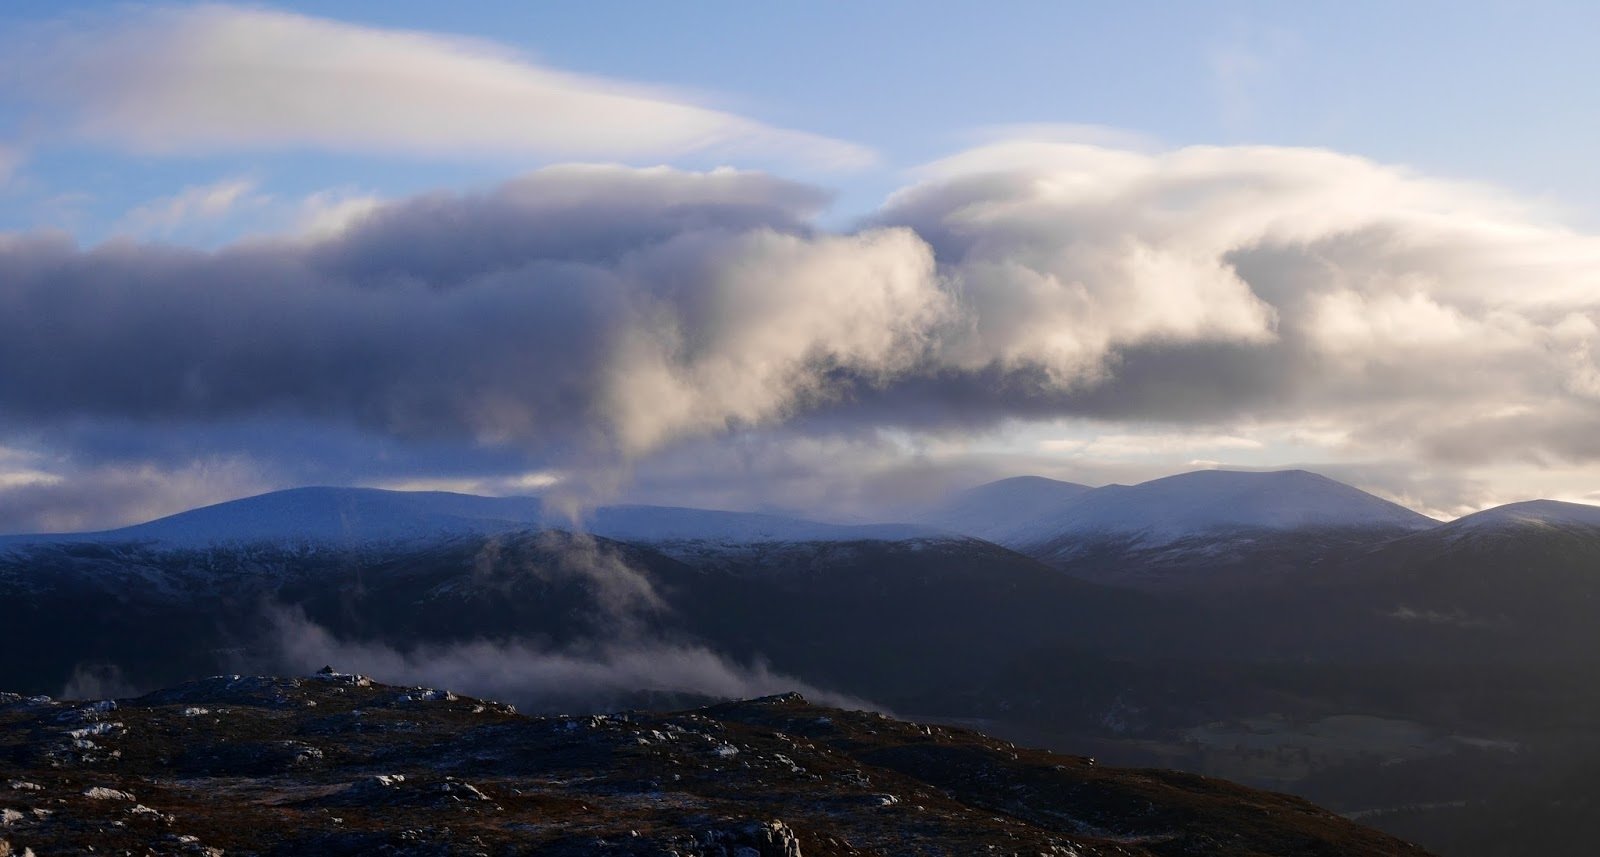 Northern Cairngorms from Craigellachie